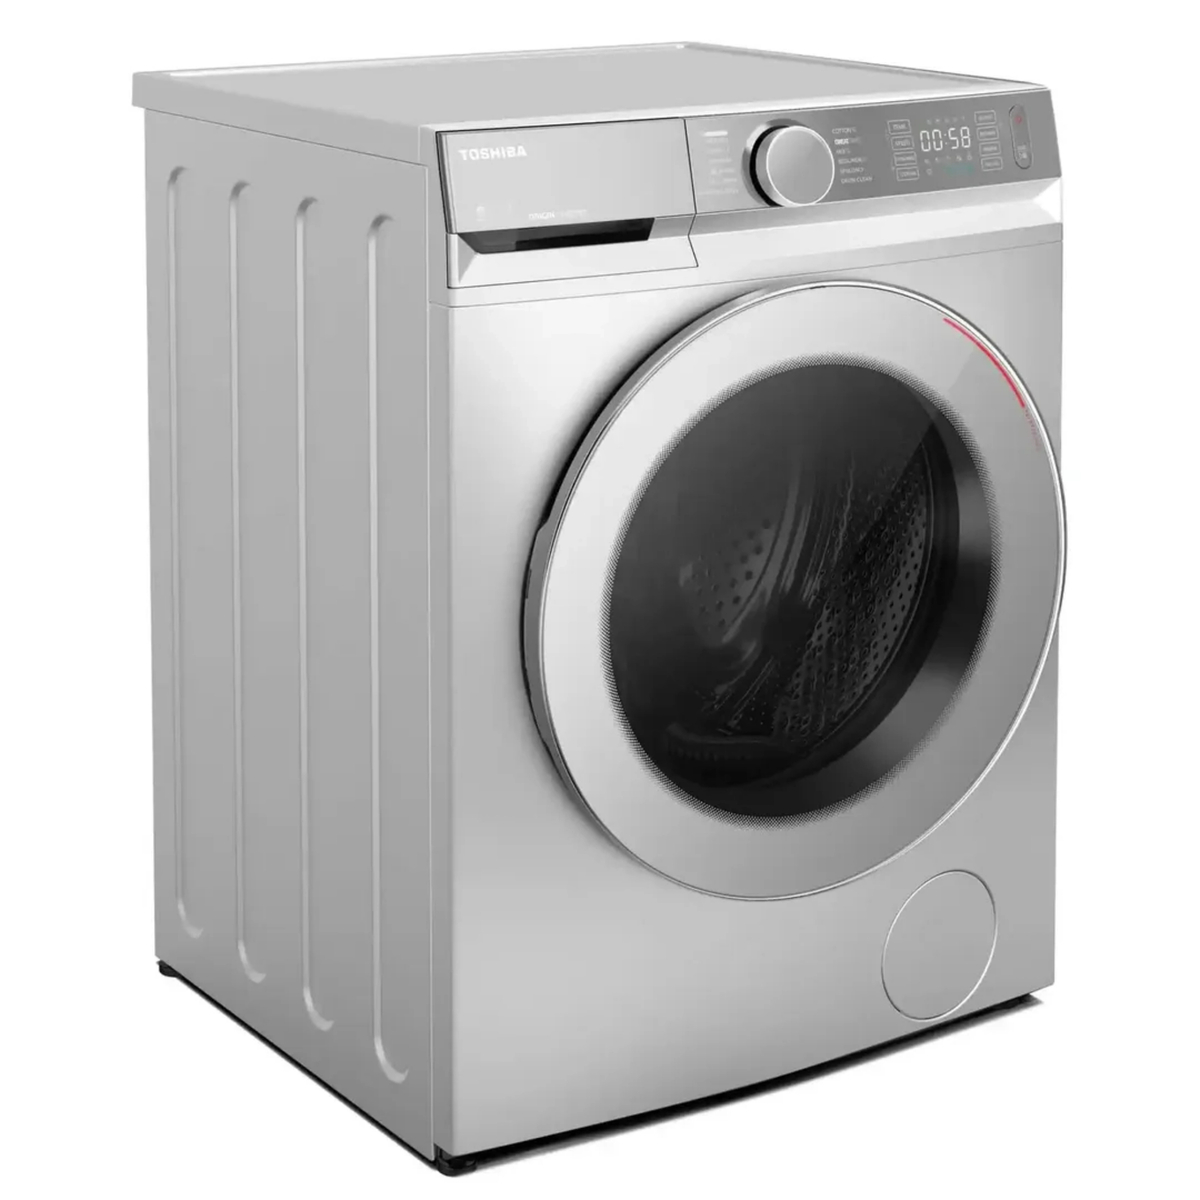 Toshiba Front Load Washer and Dryer, 10/7 kg, 1400 RPM, White, TWD-BM110GF4B(WS)